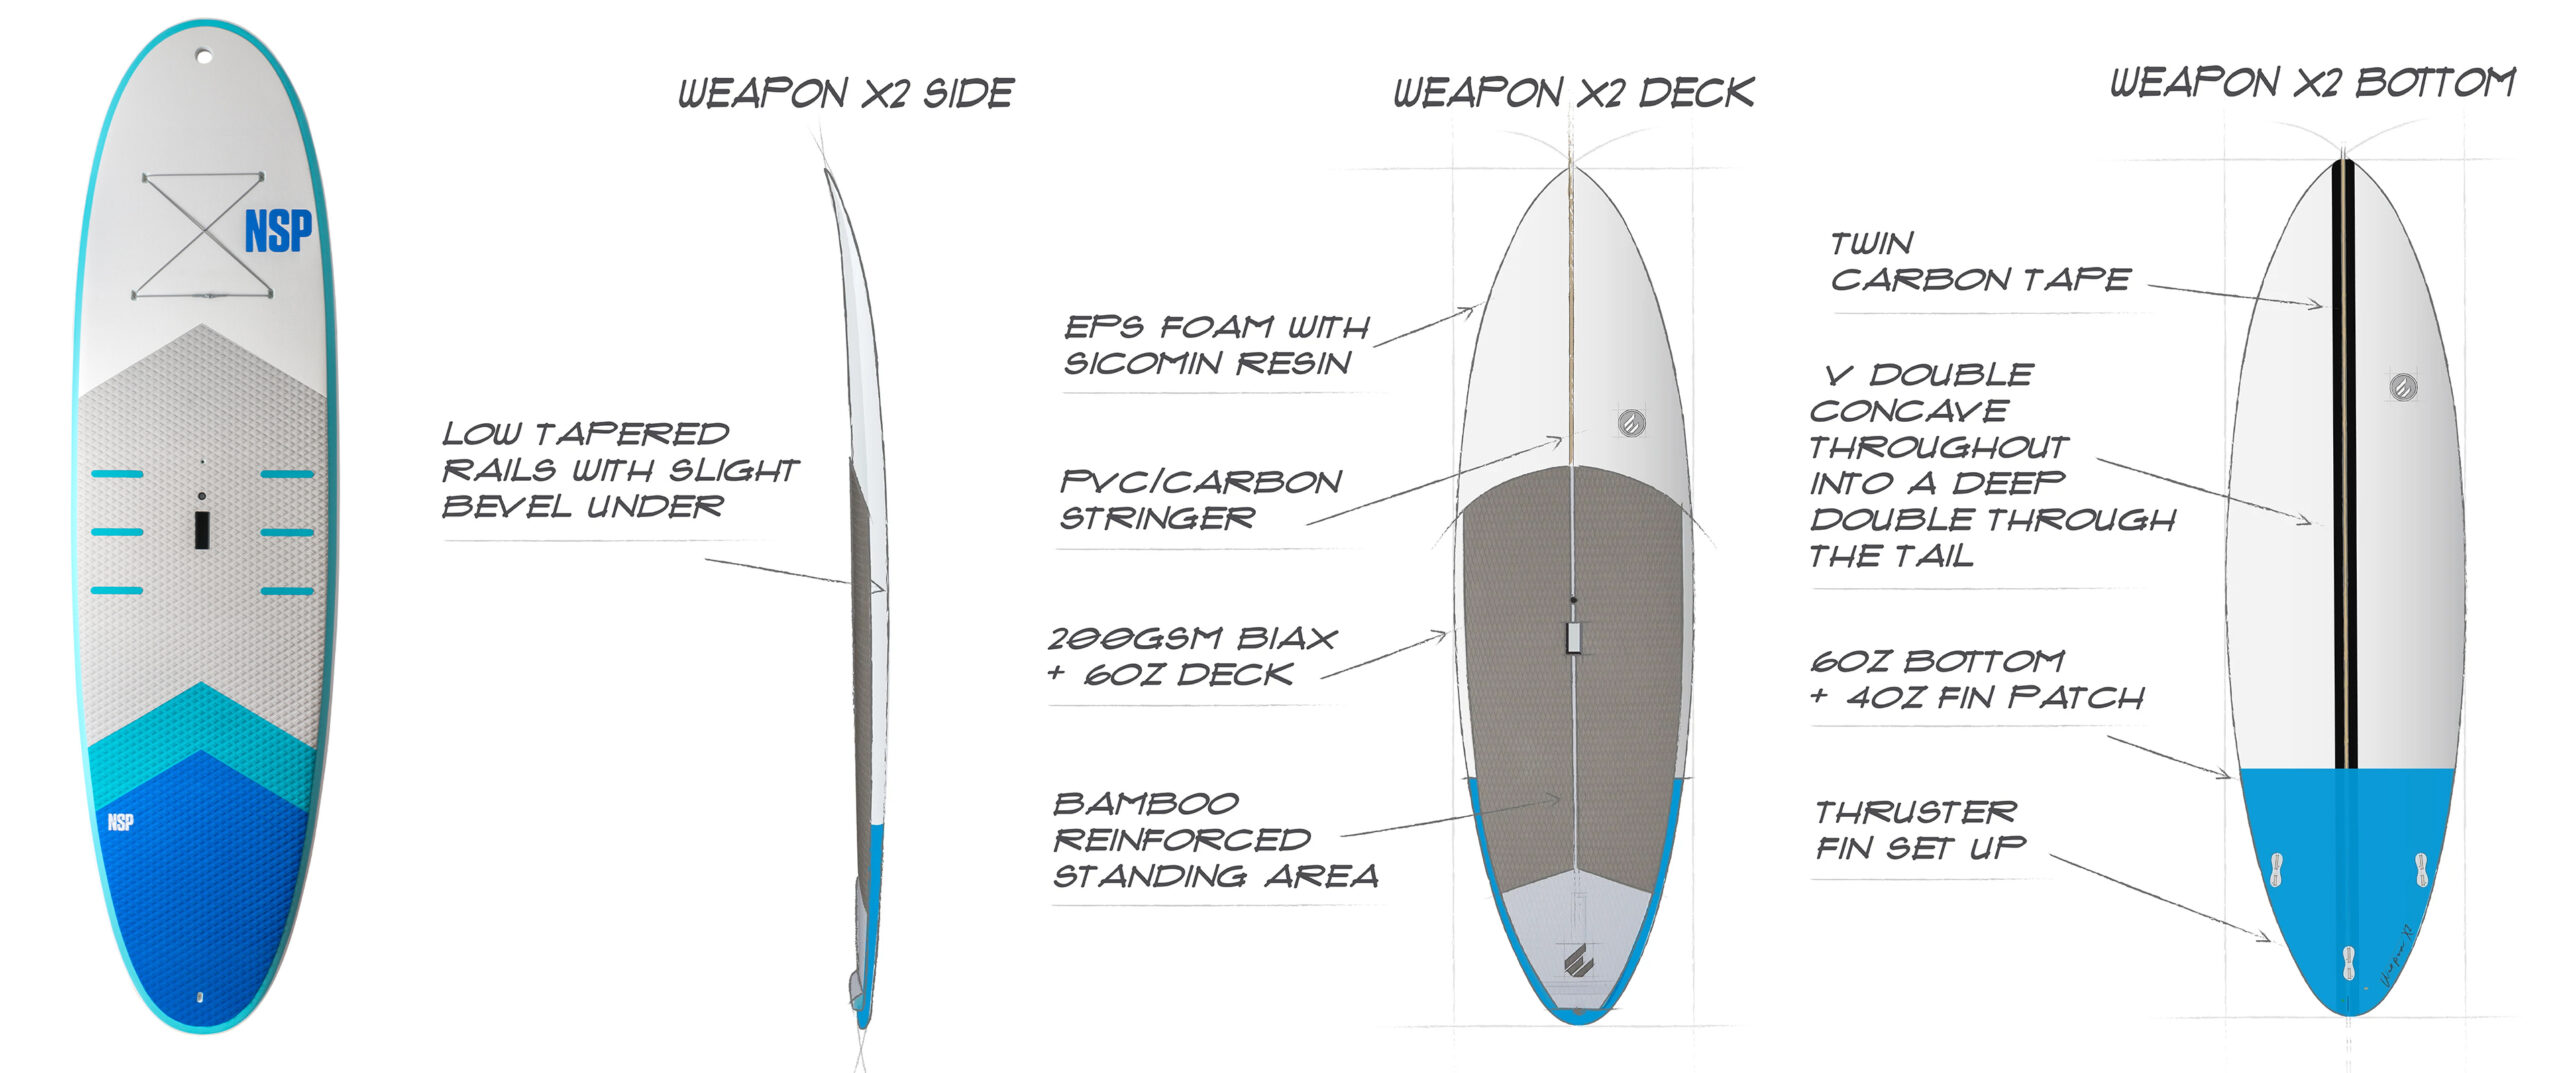 Stand-Up-Paddle-SUP-NSP-HIT-Cruiser-ECS-Weapon-X2-Design-Overview-scaled